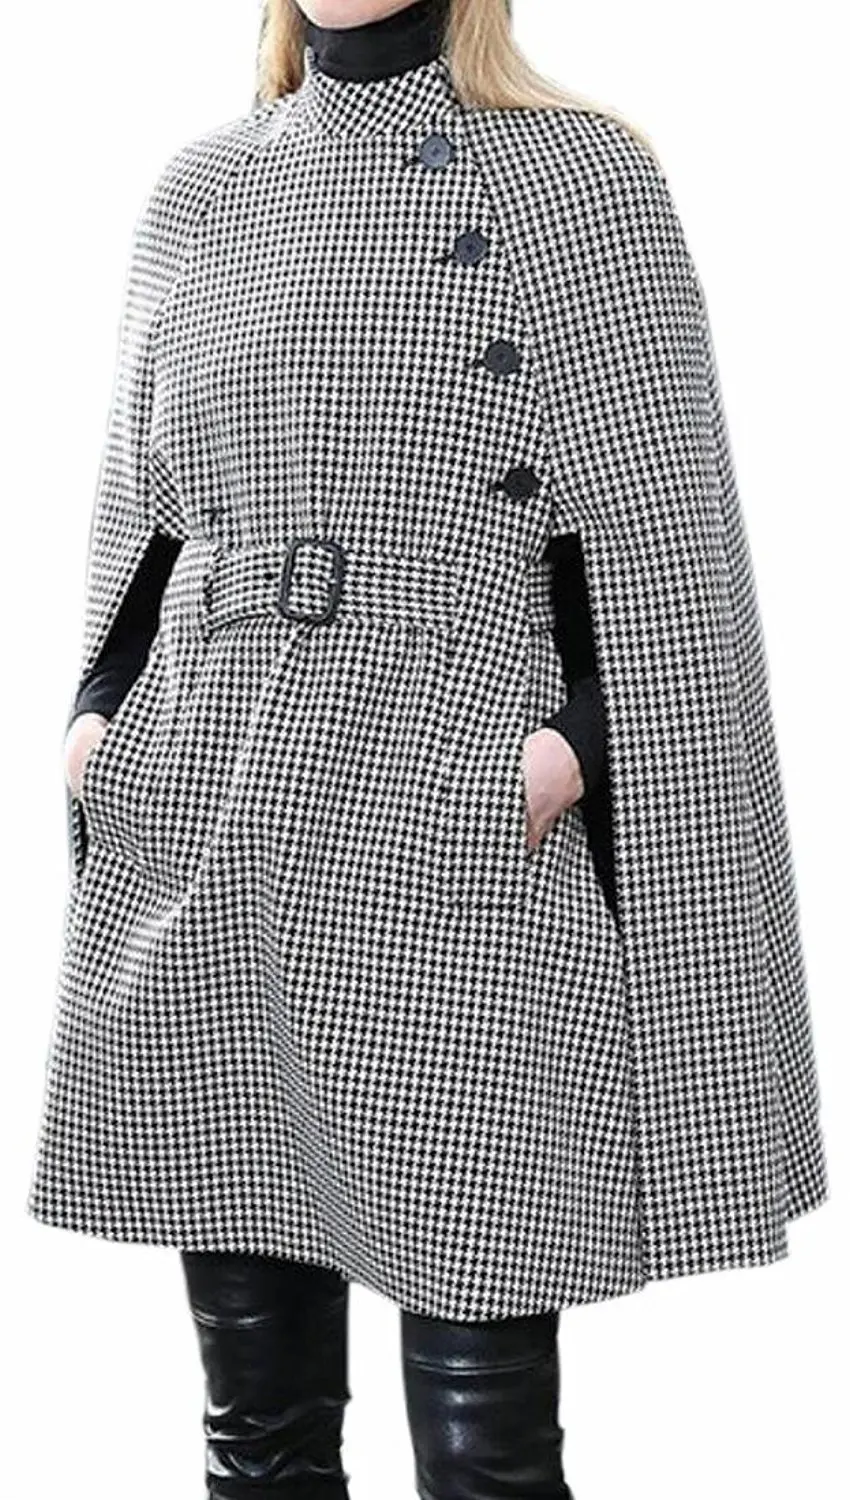 Pivaconis Womens Loose Houndstooth Thicken Long Trench Pea Coat Jacket Outerwear